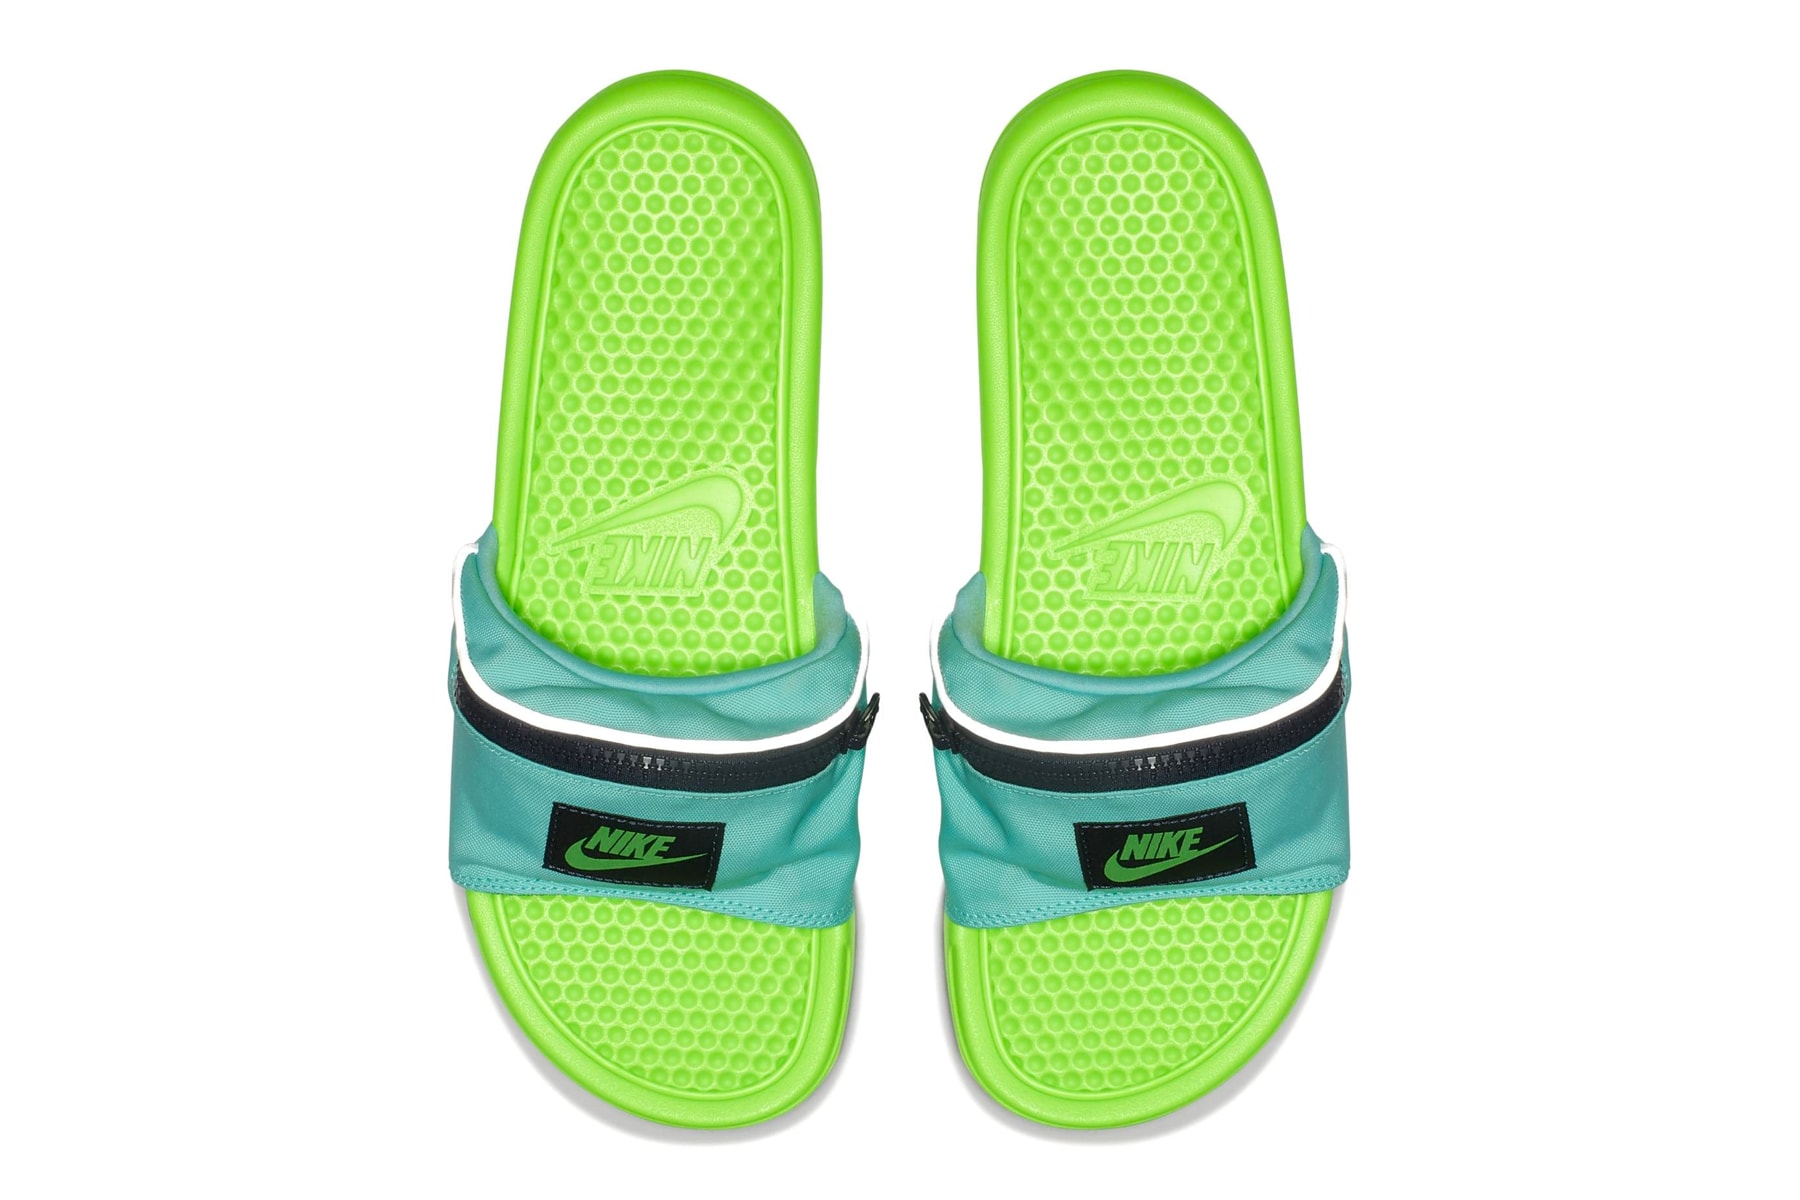 Nike Created the Sandal-Fanny Pack Hybrid You Never Knew You